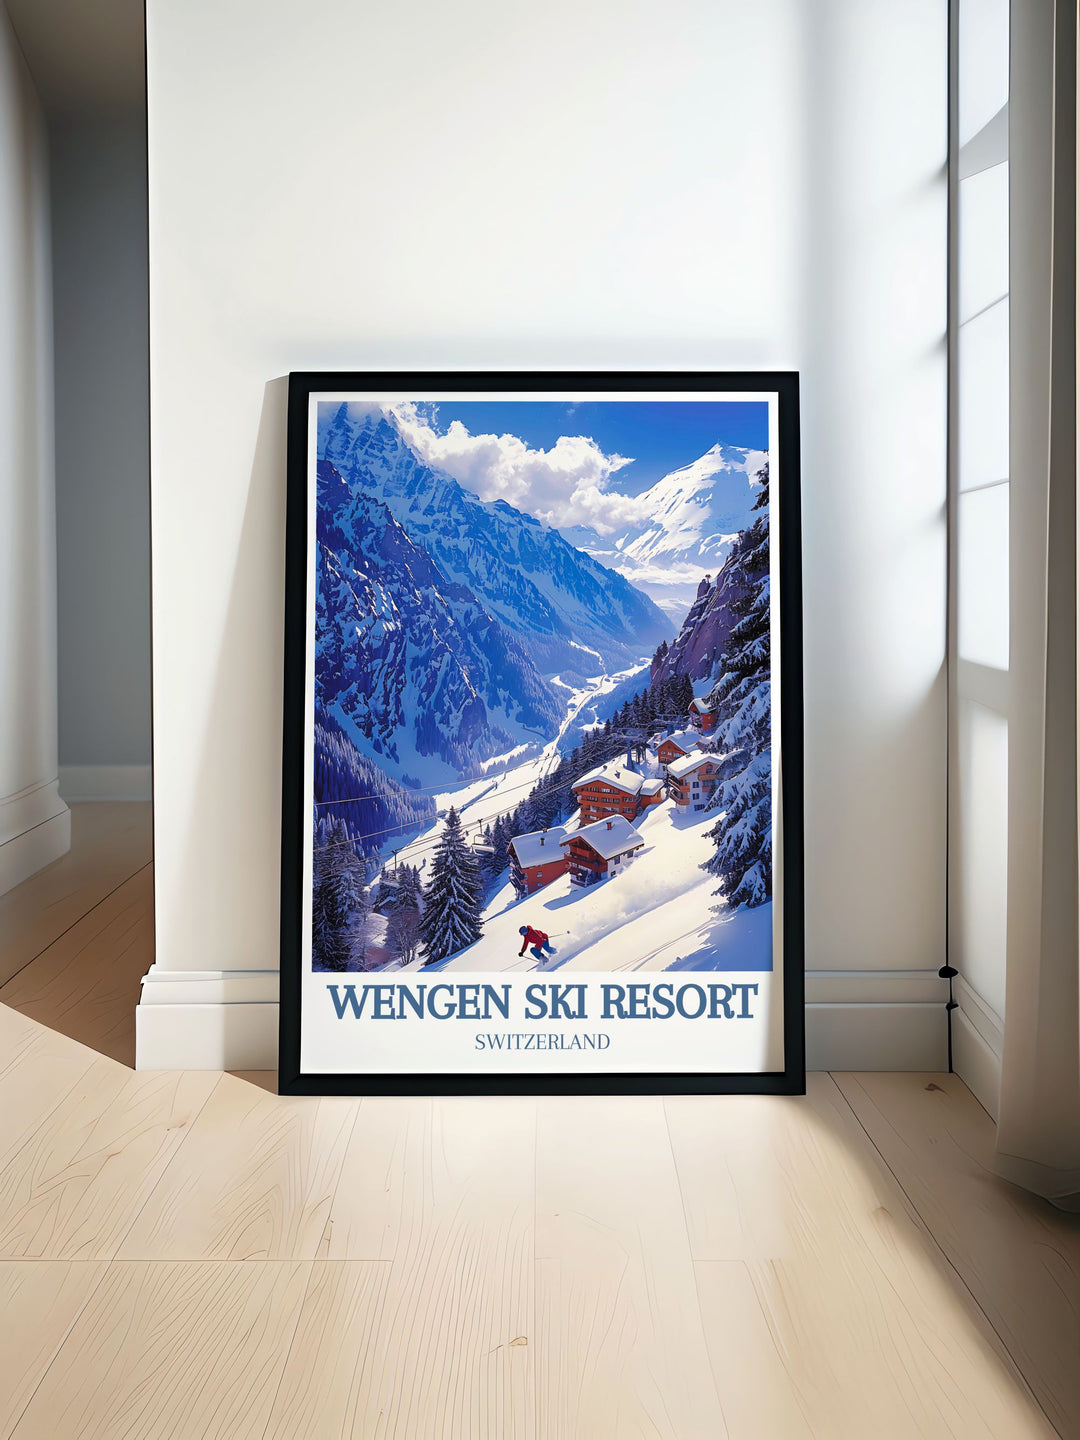 Home decor piece featuring Wengen Ski Resort, capturing the resorts lush greenery and cascading waterfalls. Perfect for adding a sense of natural elegance and serenity to your living space, celebrating New York States outdoor beauty.